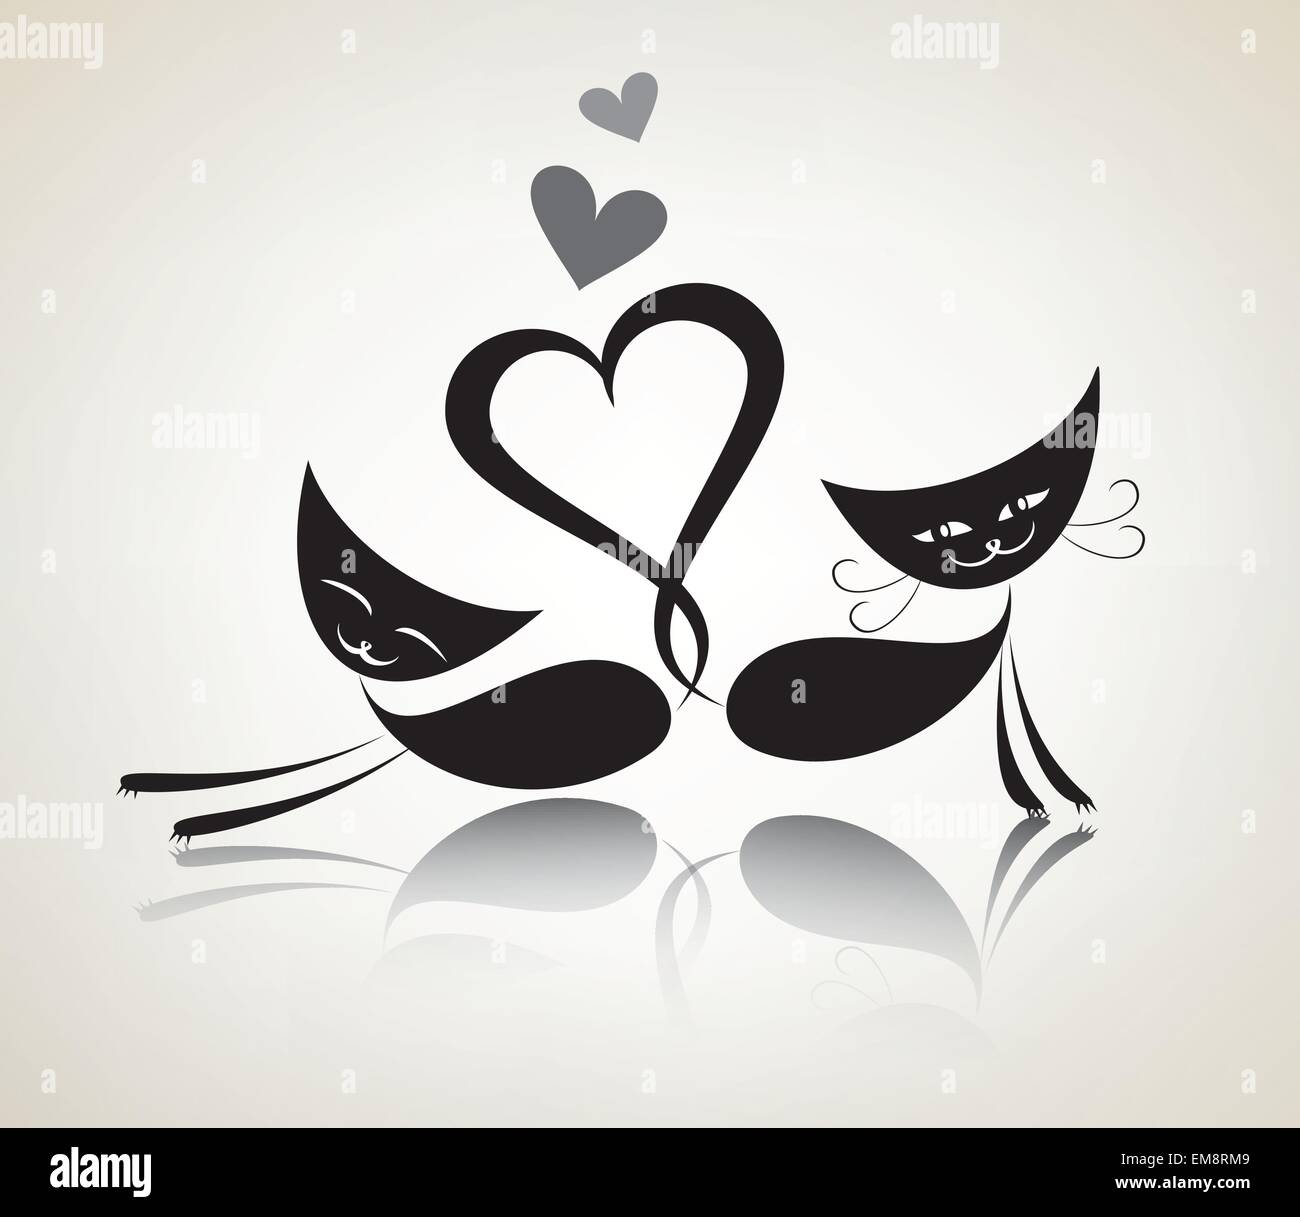 Photo about Silhouette of two black cats in love. Illustration of